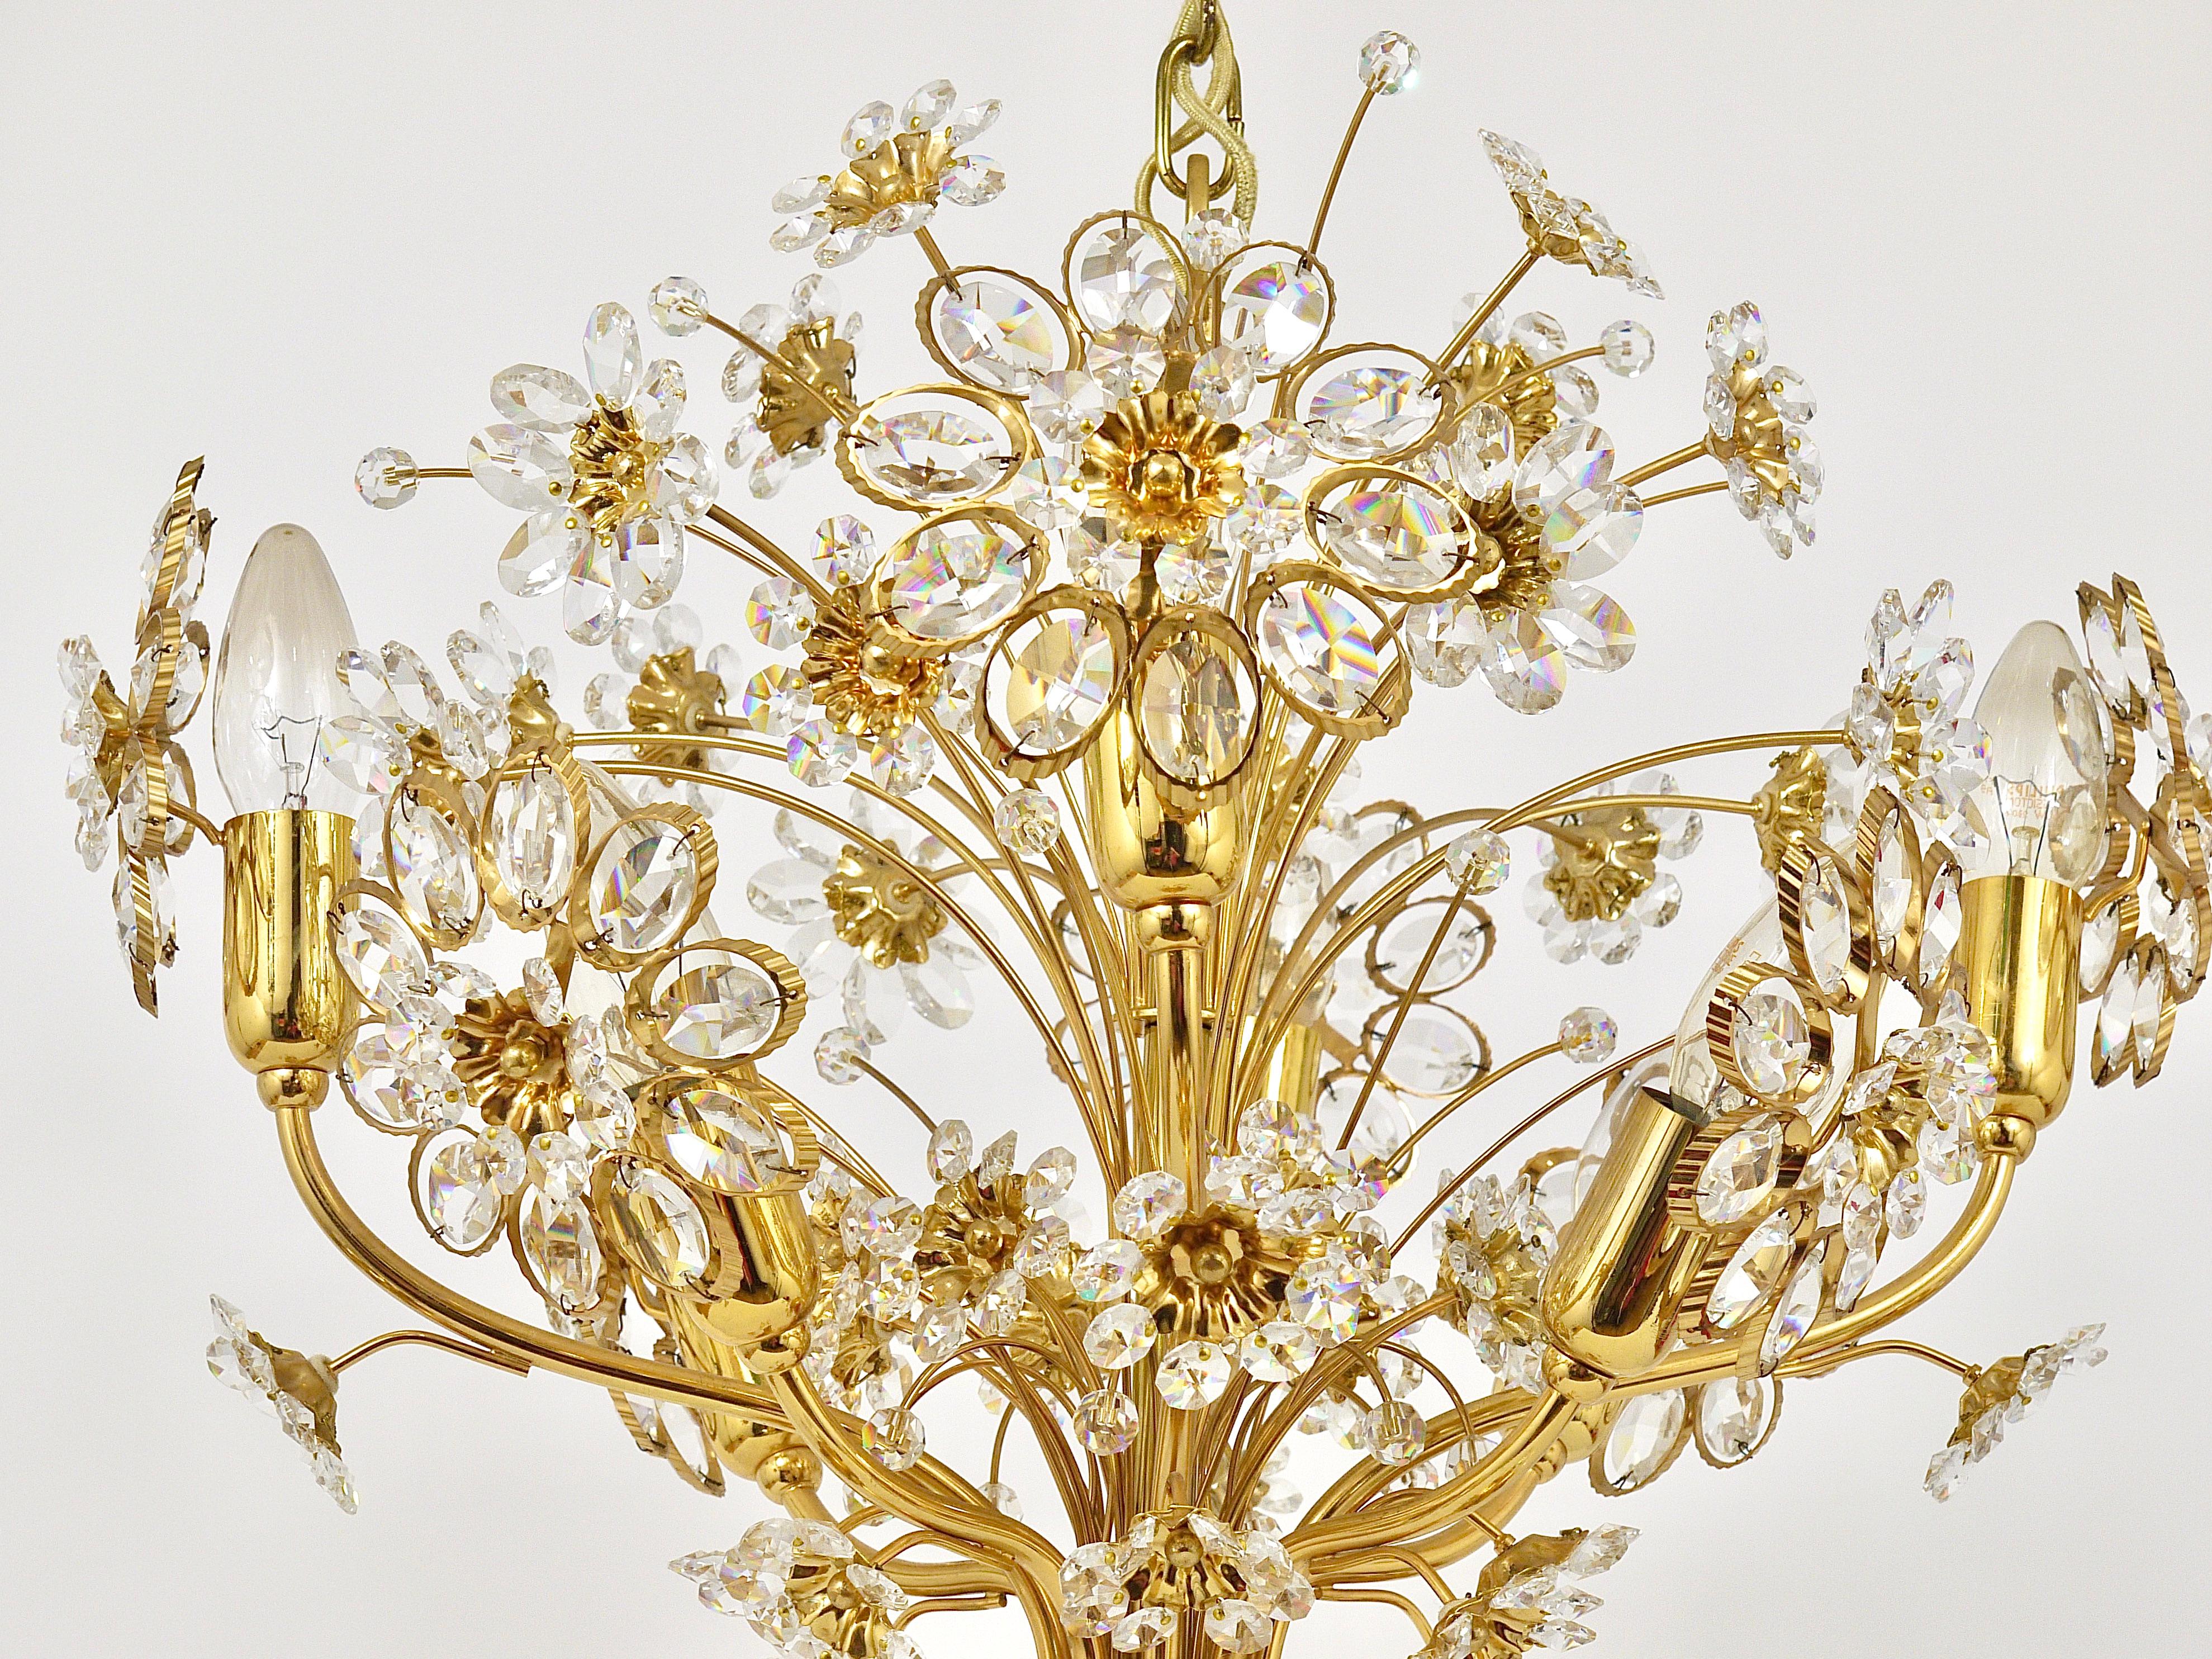 A beautiful handcrafted floral chandelier, manufactured in the 1970s by Palwa Germany. Made of gold-plated brass with faceted crystal glass flower petals. Has eight light sources. In excellent condition.
Please see our matching sconces and wall